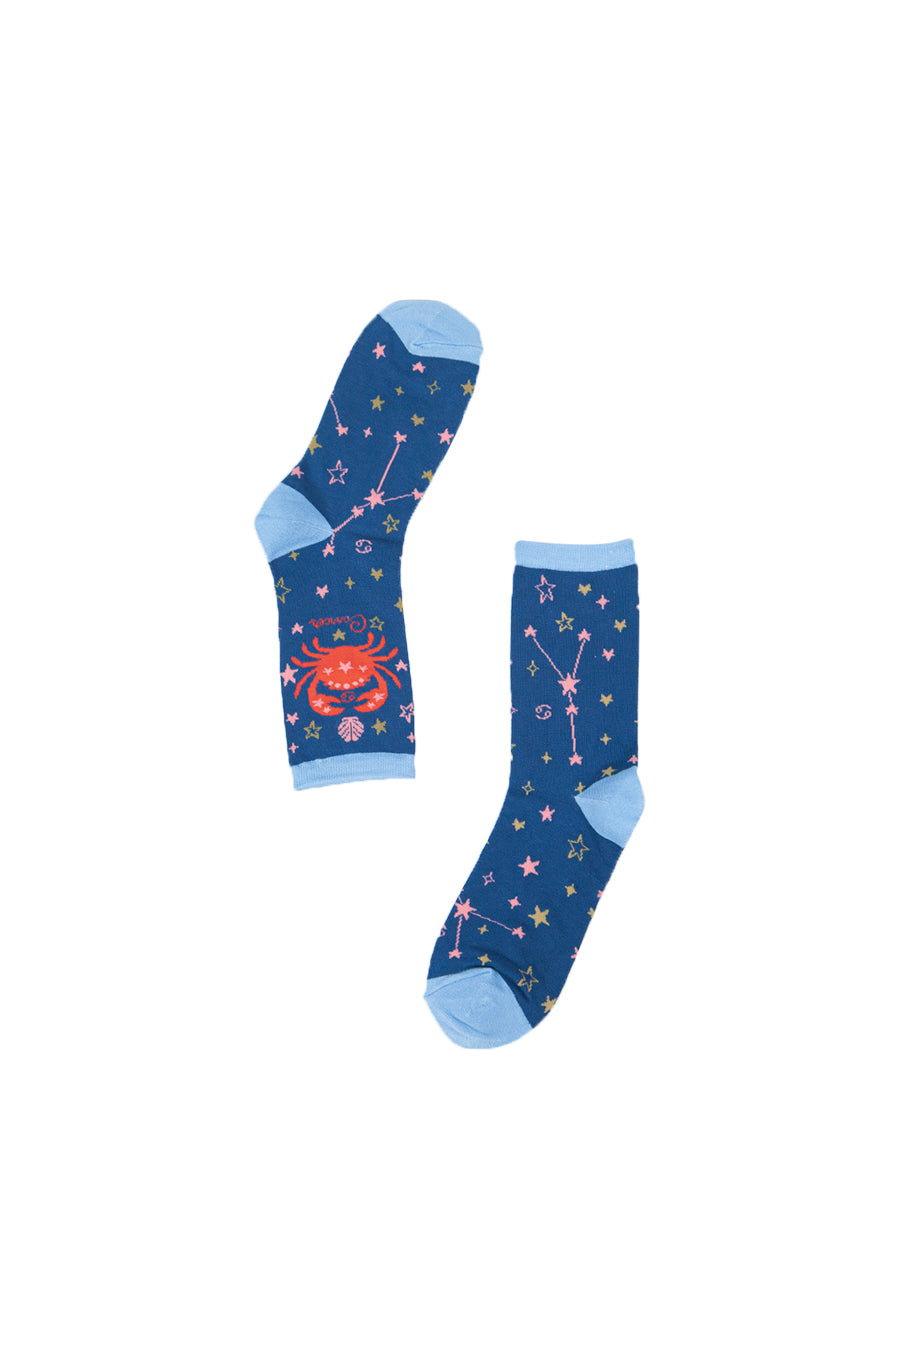 showing the constellation of cancer on the bamboo socks